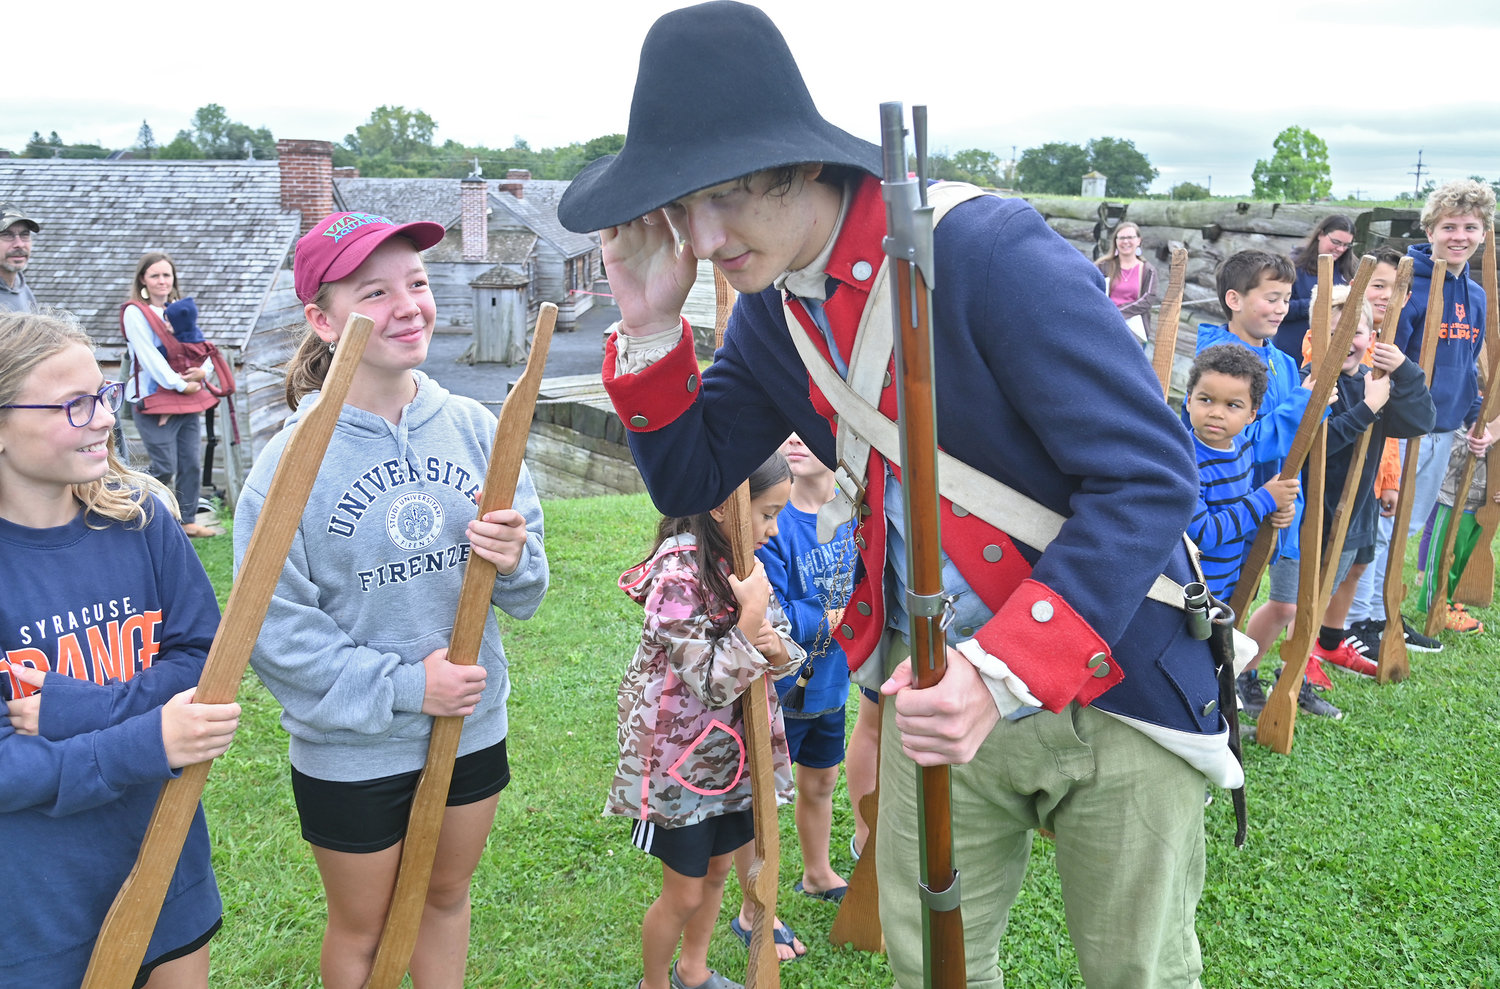 Elijah Braun listens for Liesl Saufley, 11, to say 'ting' during a musket drill Wednesday at Fort Stanwix in Rome. The 'ting' is the sound of the gun's ram rod hitting the bottom of the gun barrel.